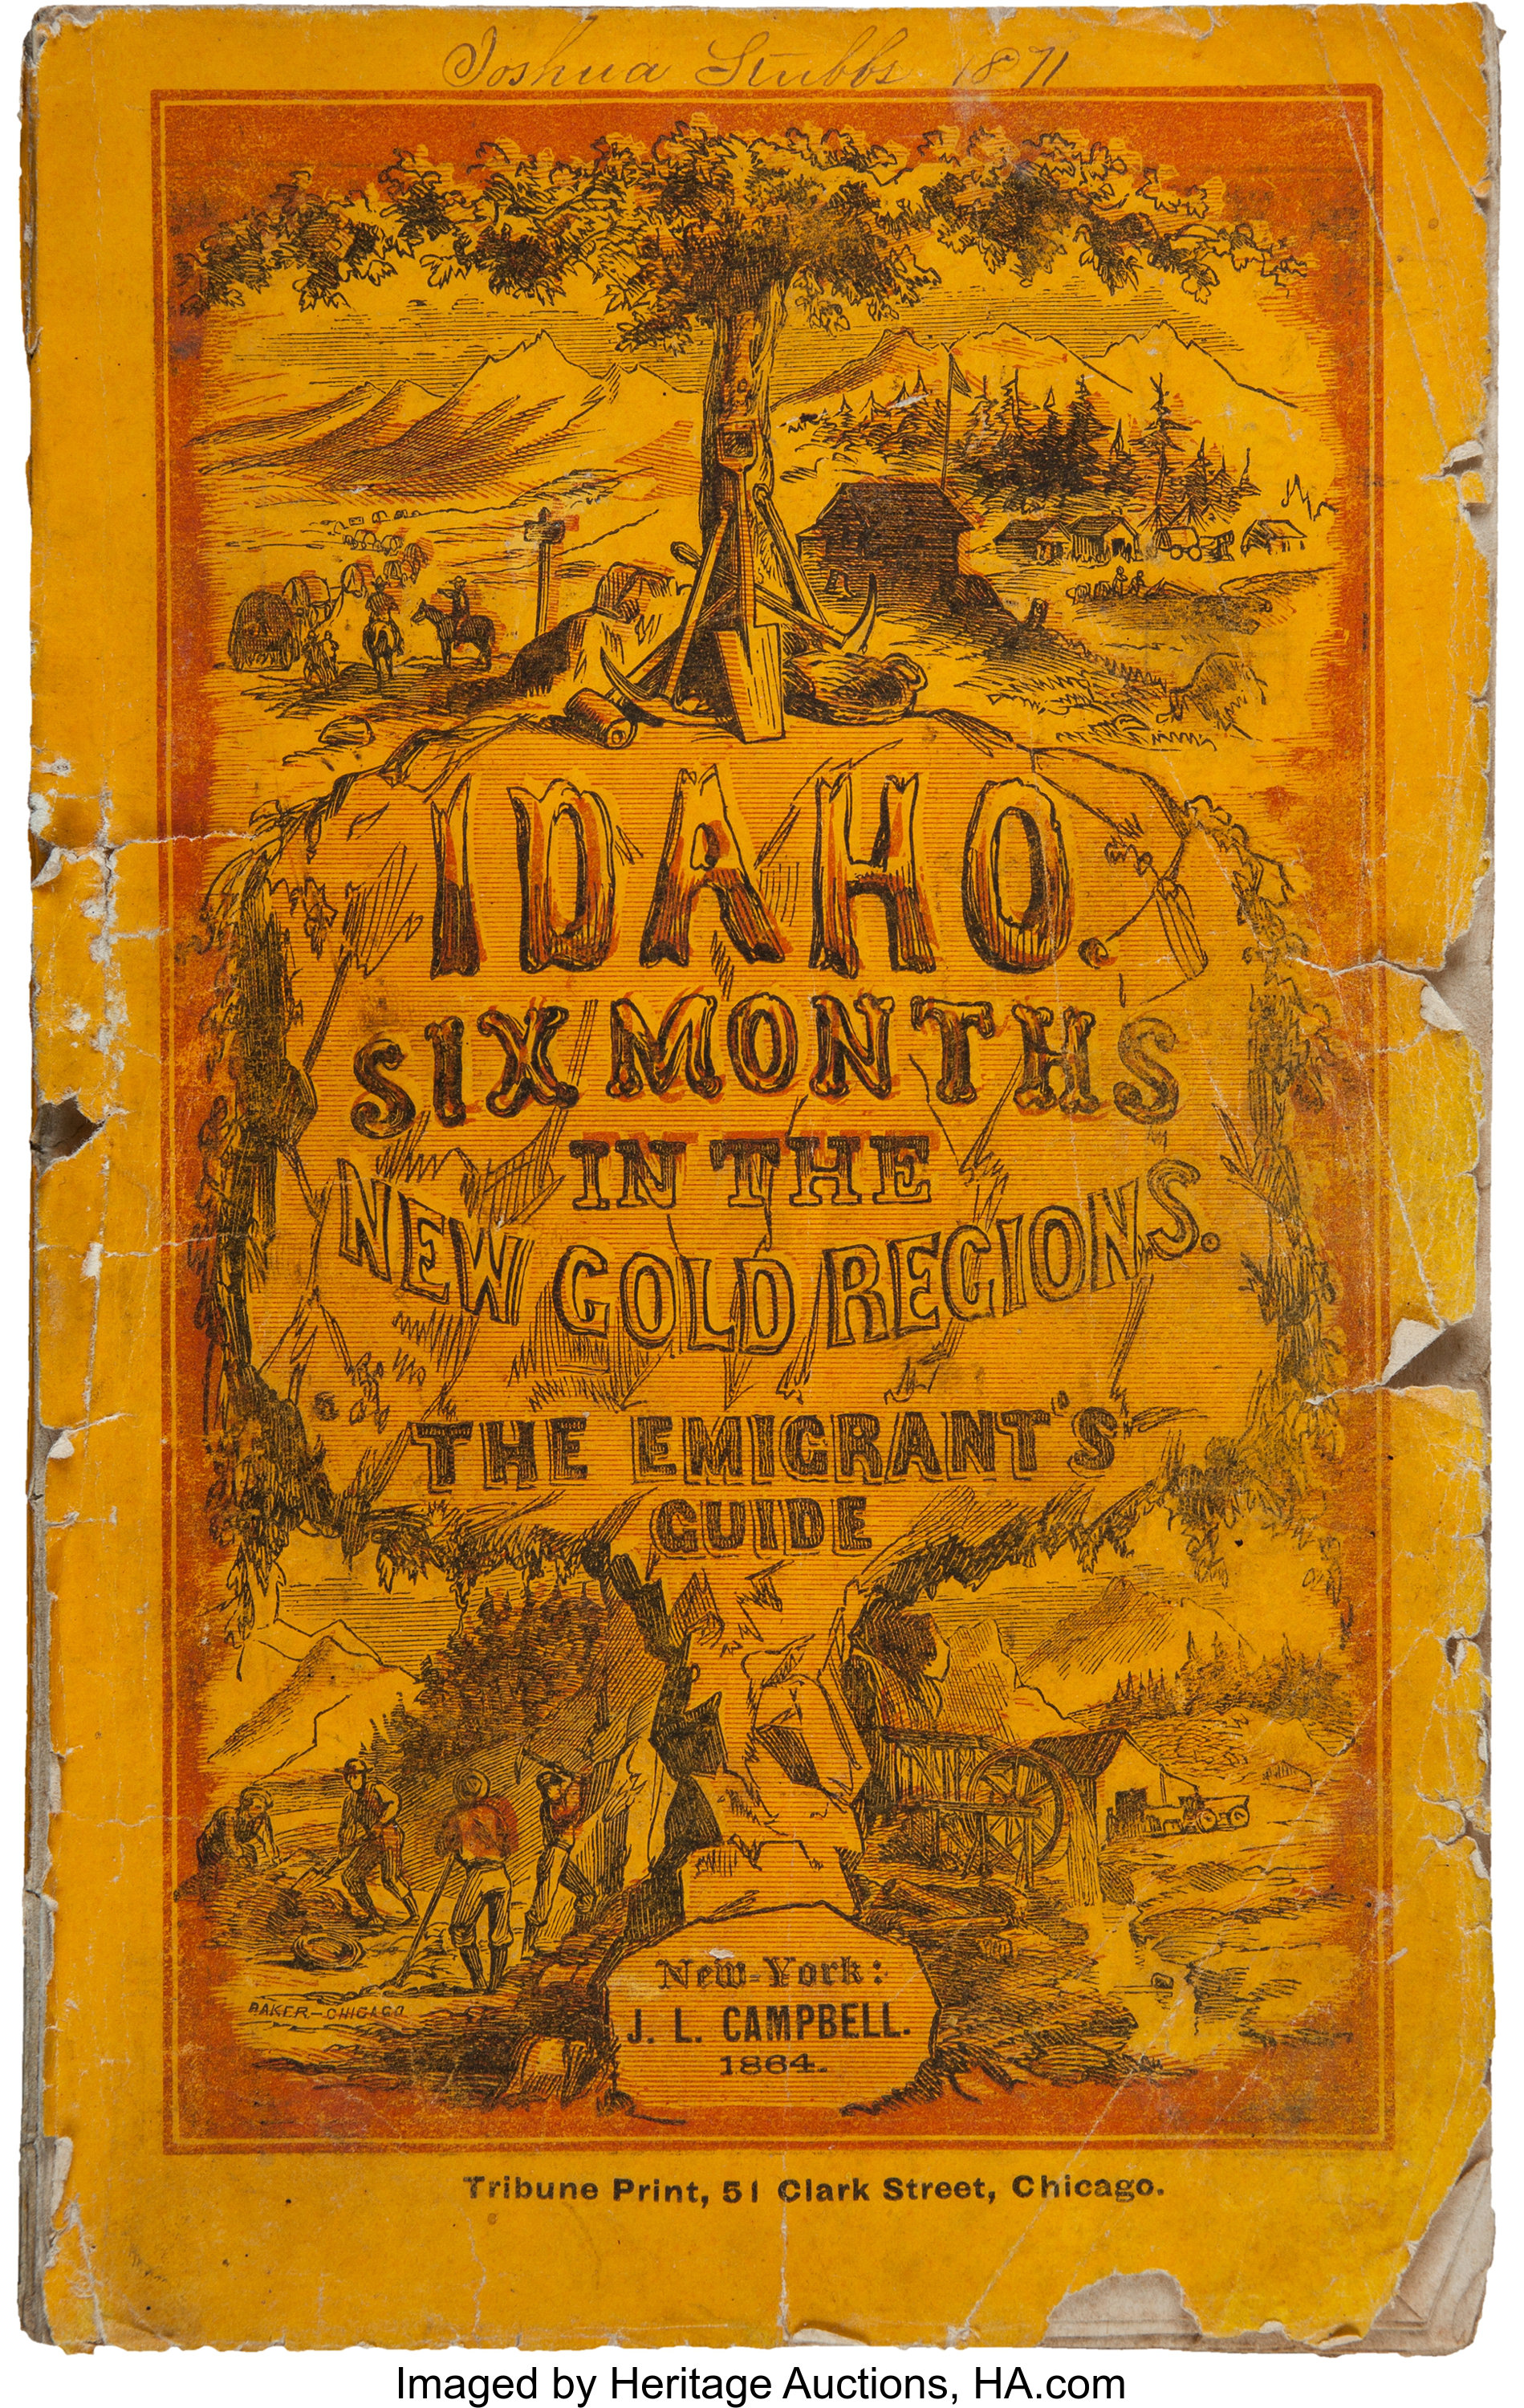 Idaho: Six months in the new gold diggings. The emigrant's guide overland (book cover)